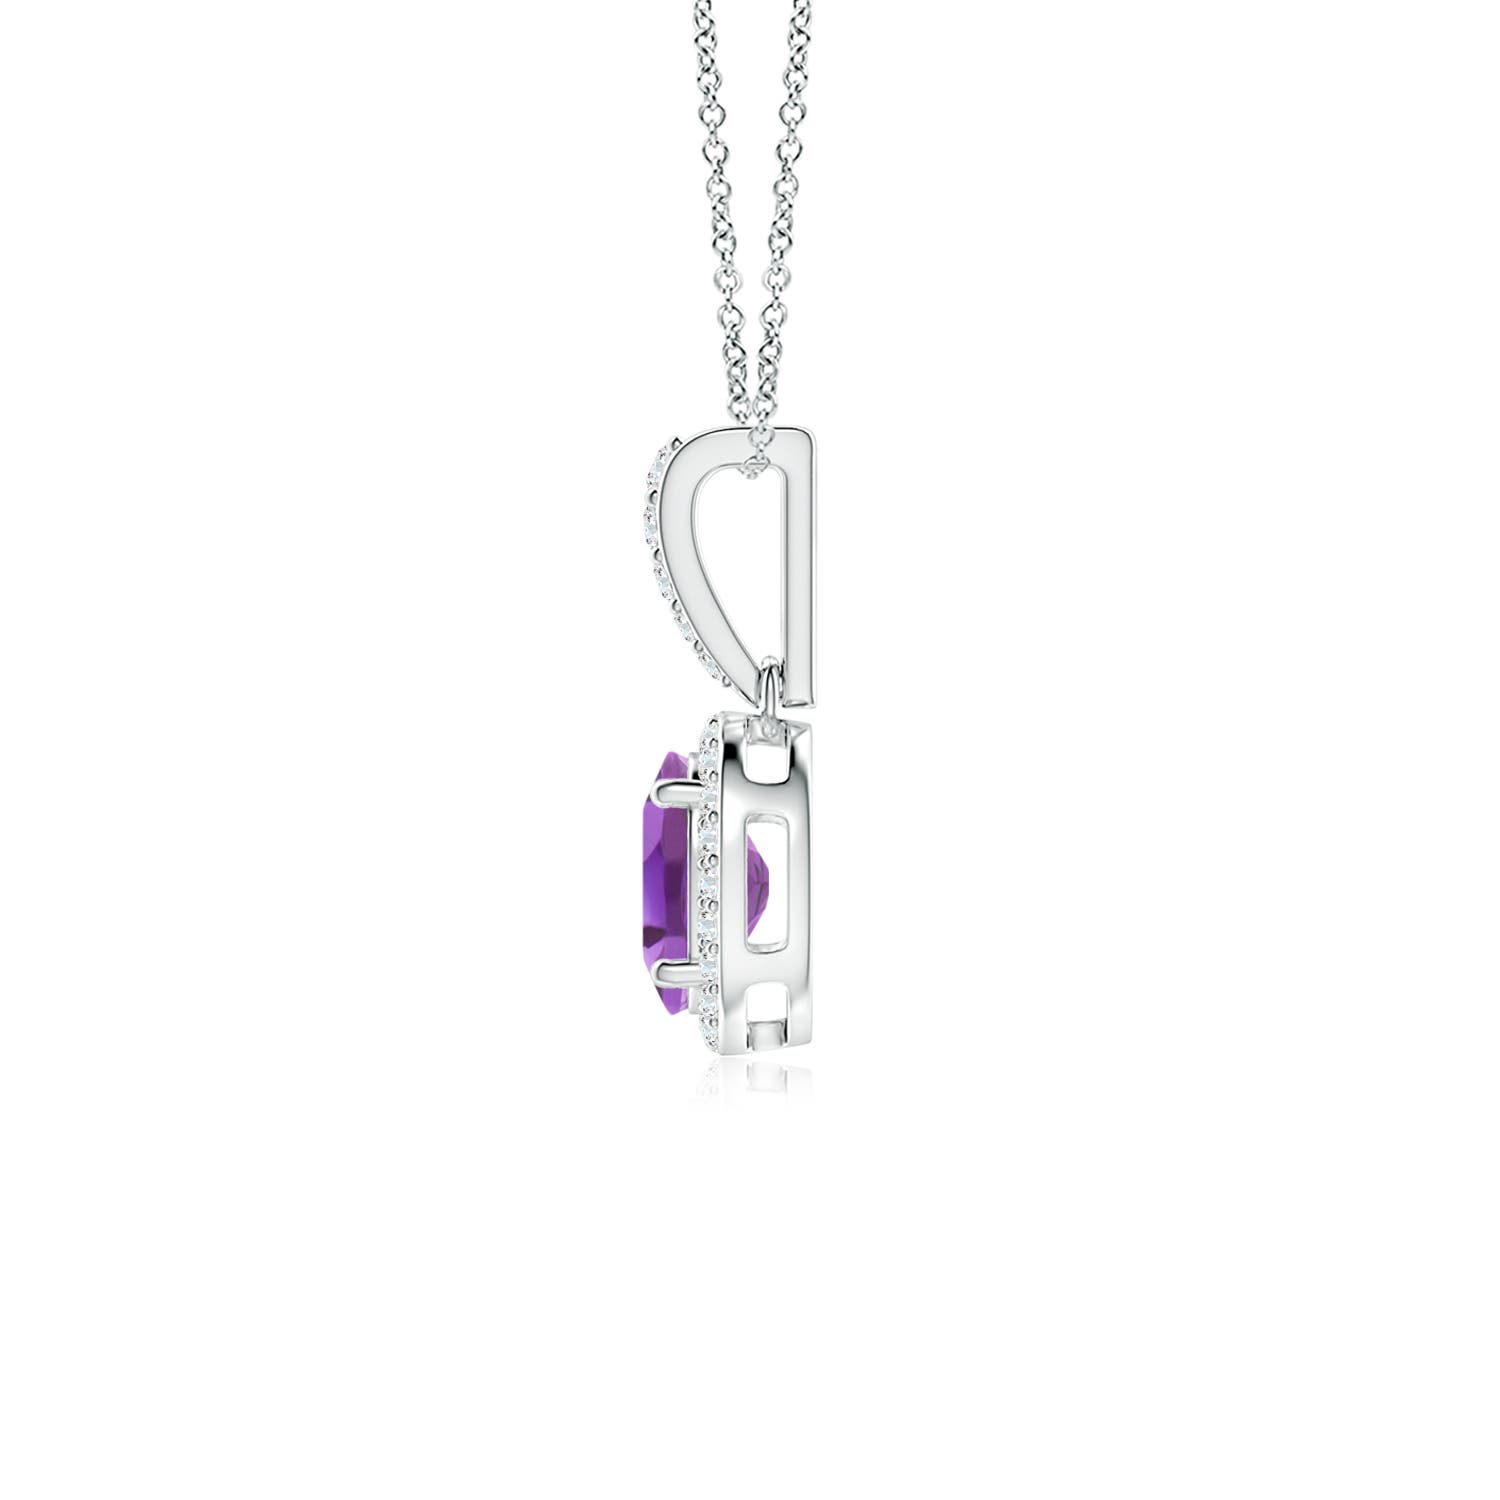 A - Amethyst / 0.84 CT / 14 KT White Gold